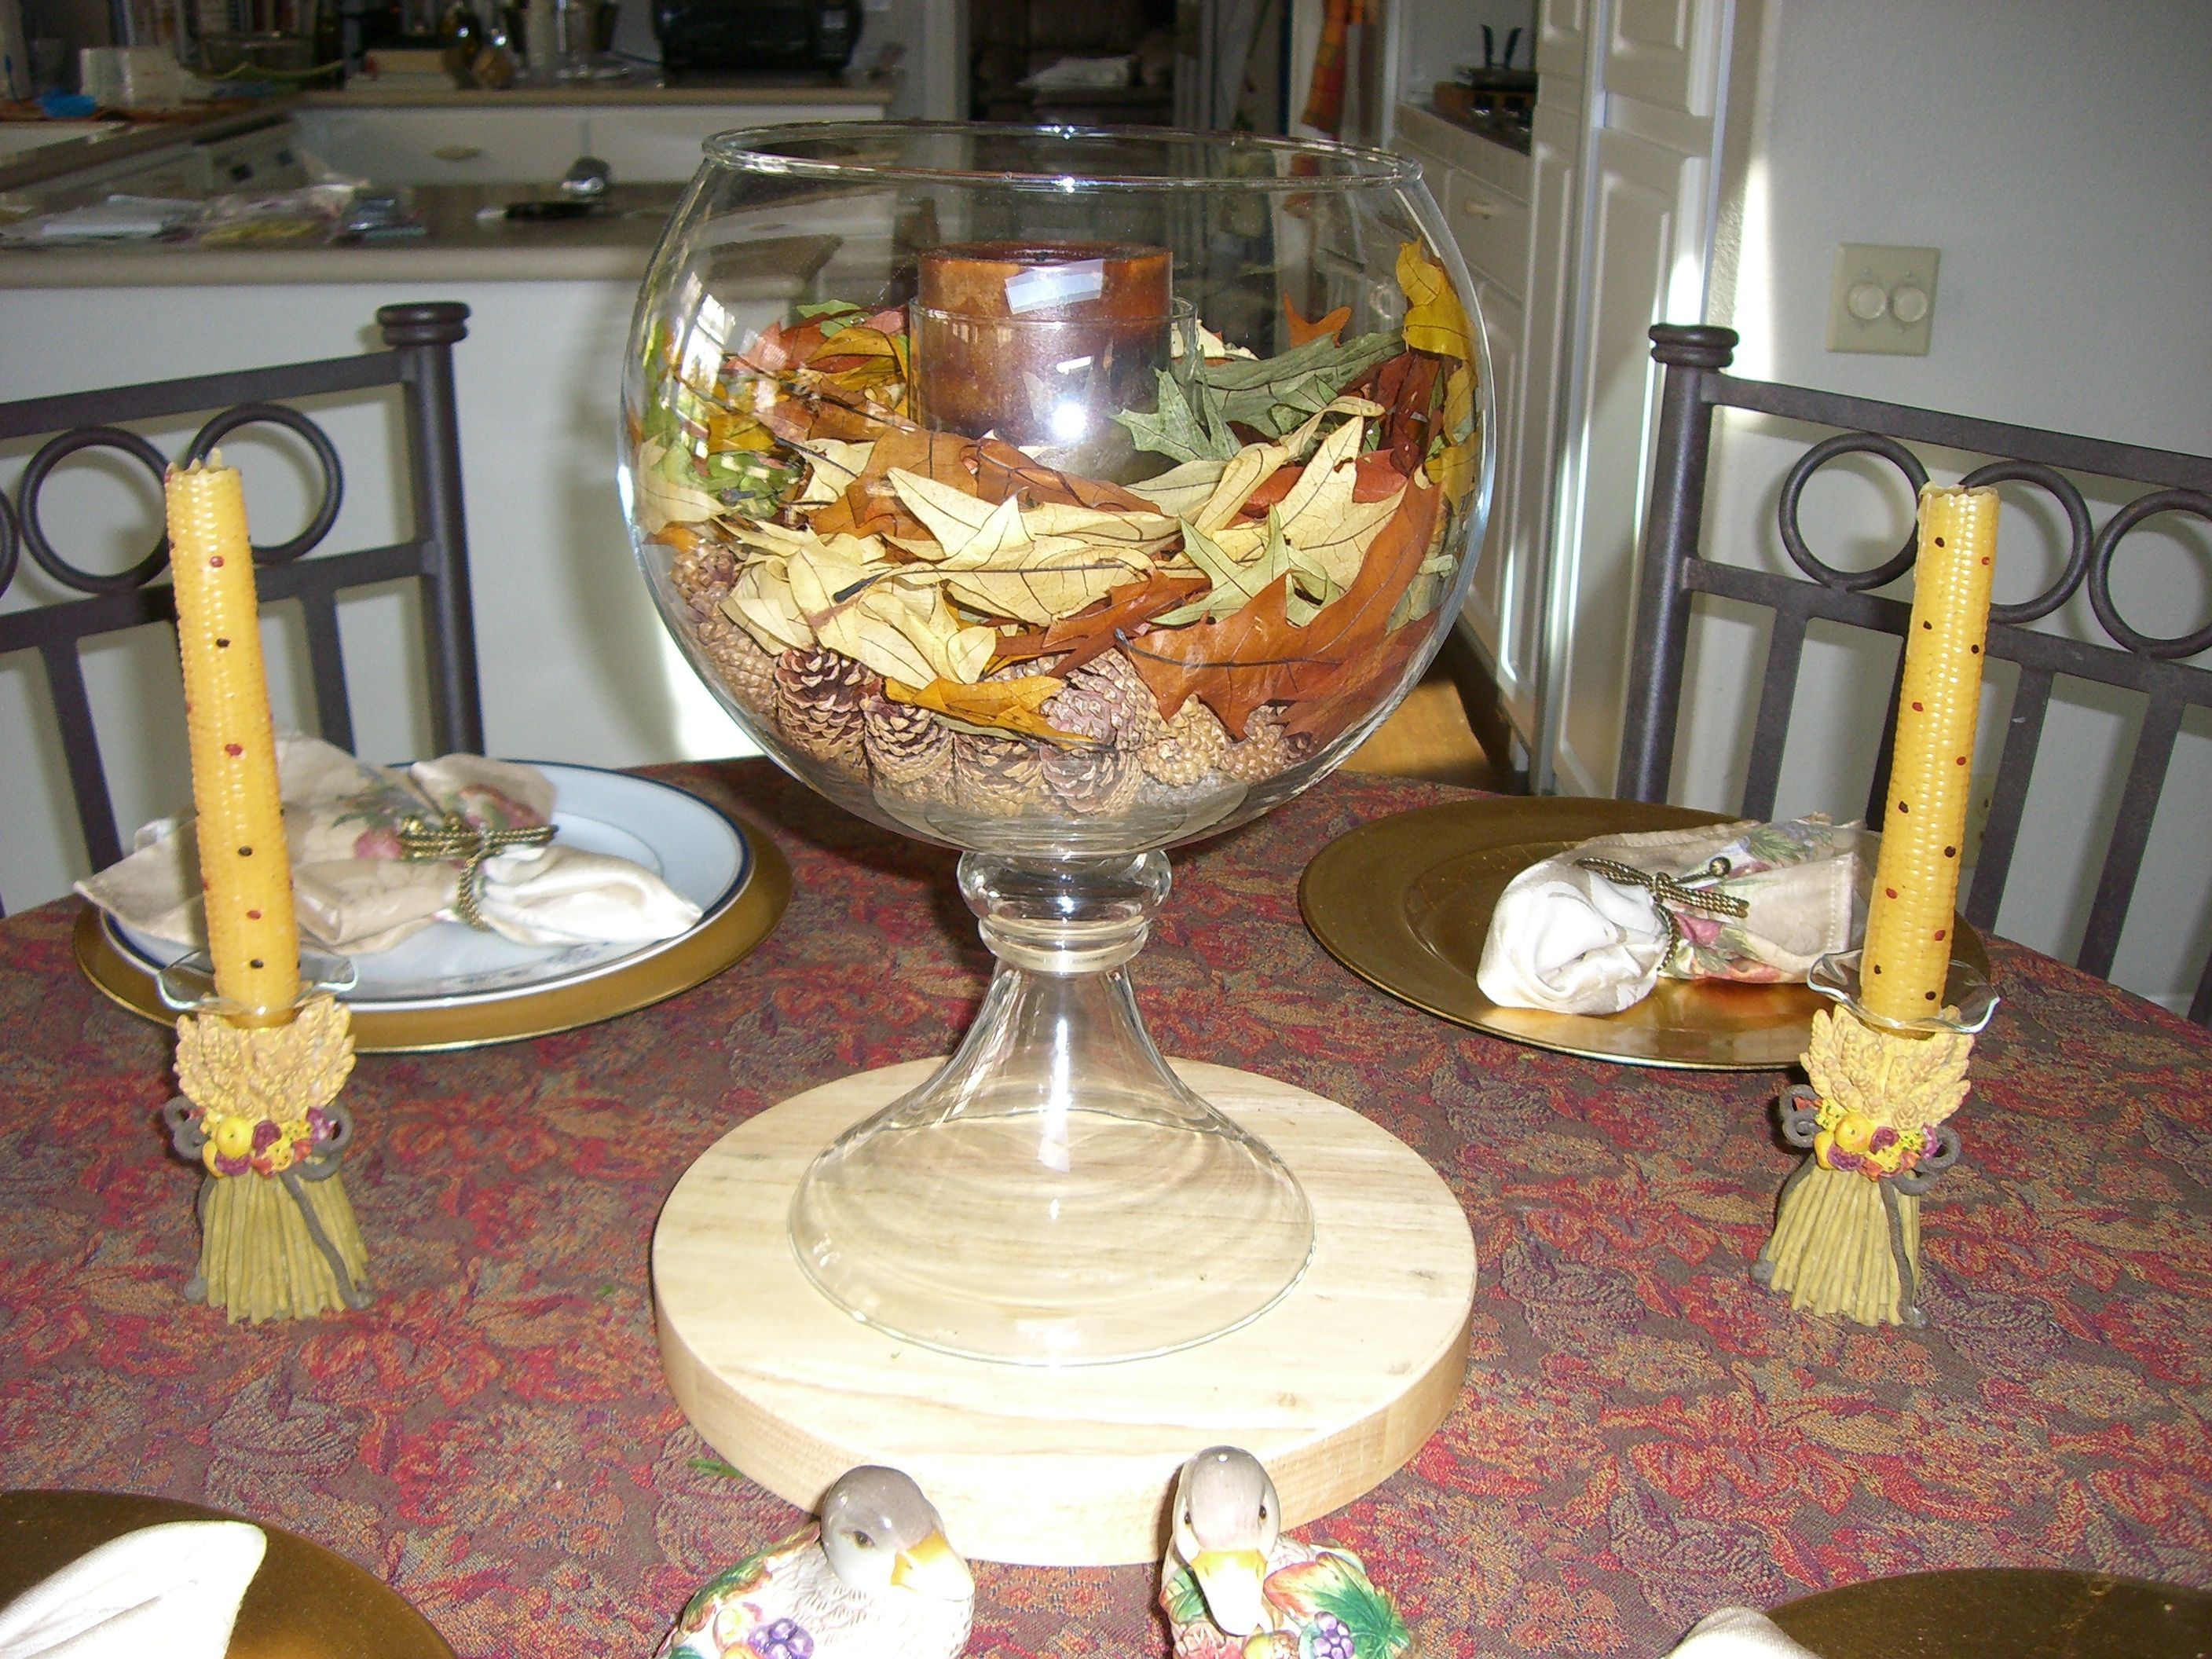 18 Fashionable Small Glass Fishbowl Vase 2024 free download small glass fishbowl vase of thanksgiving candle w mini pine cones fall leaves both from crate pertaining to thanksgiving candle w mini pine cones fall leaves both from crate and barrel fish